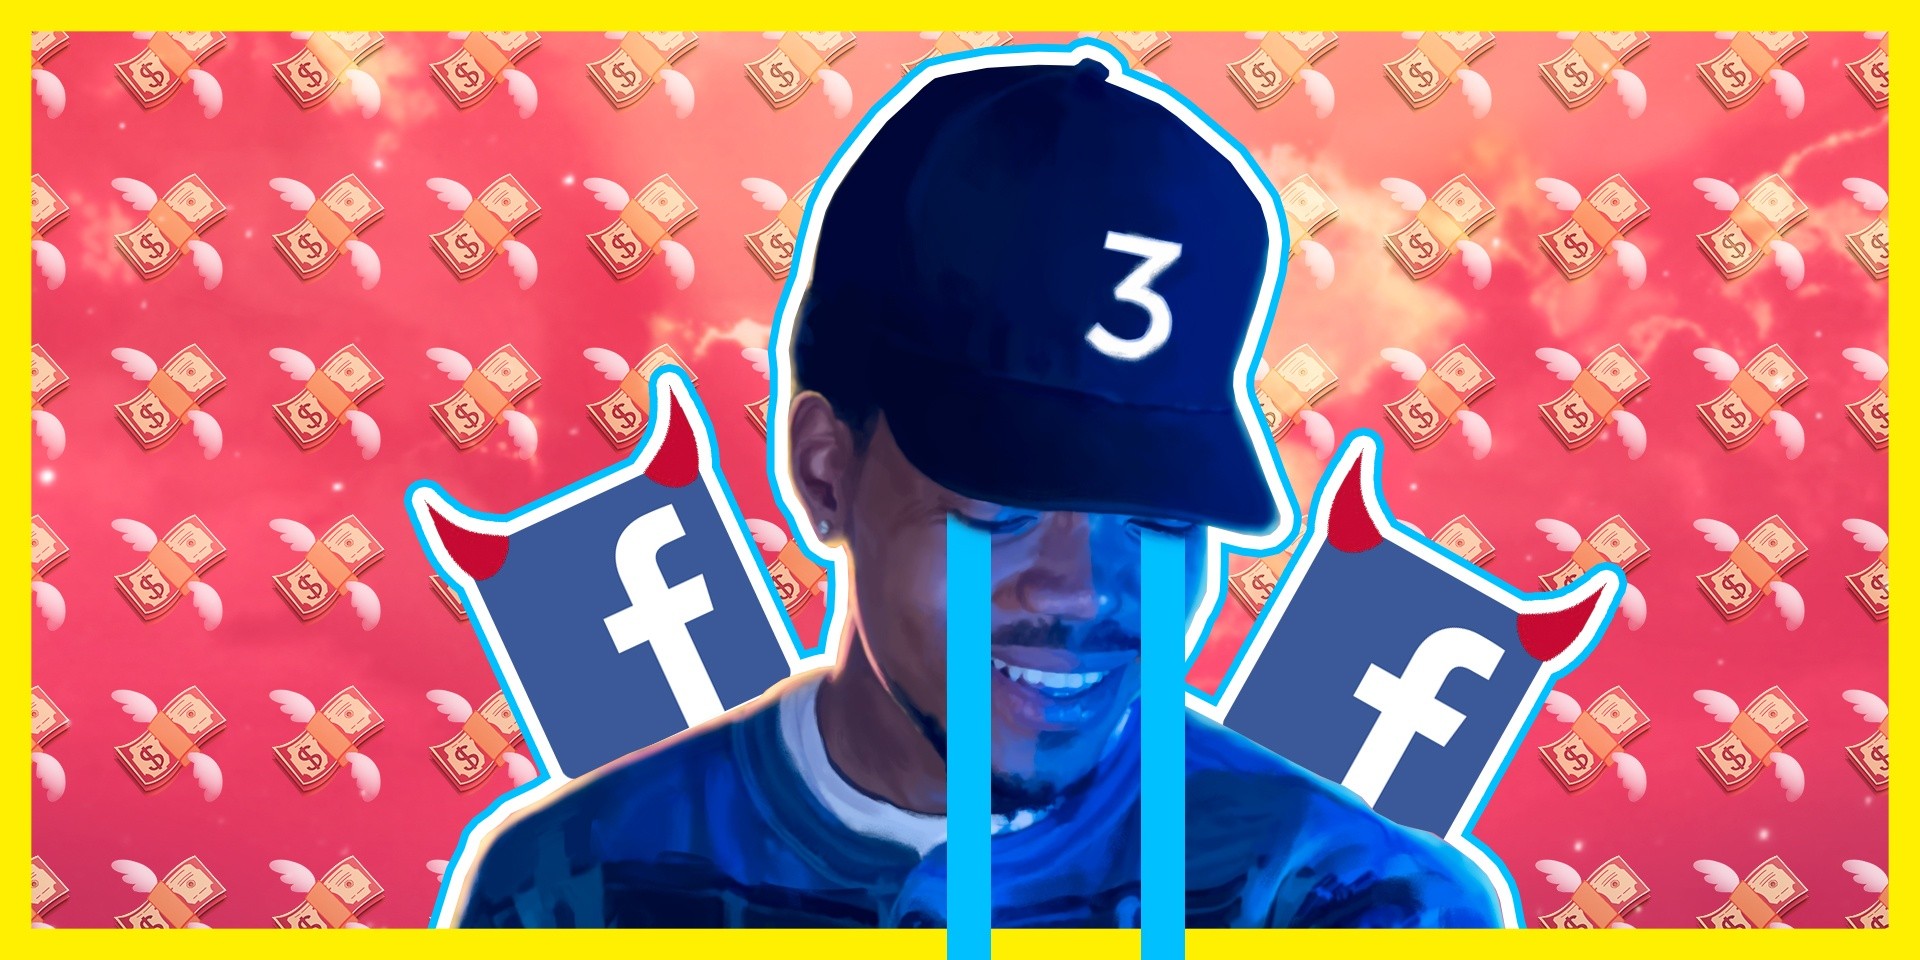 What have you RSVPed to on Facebook? Diving into concert ticket scalping on social media